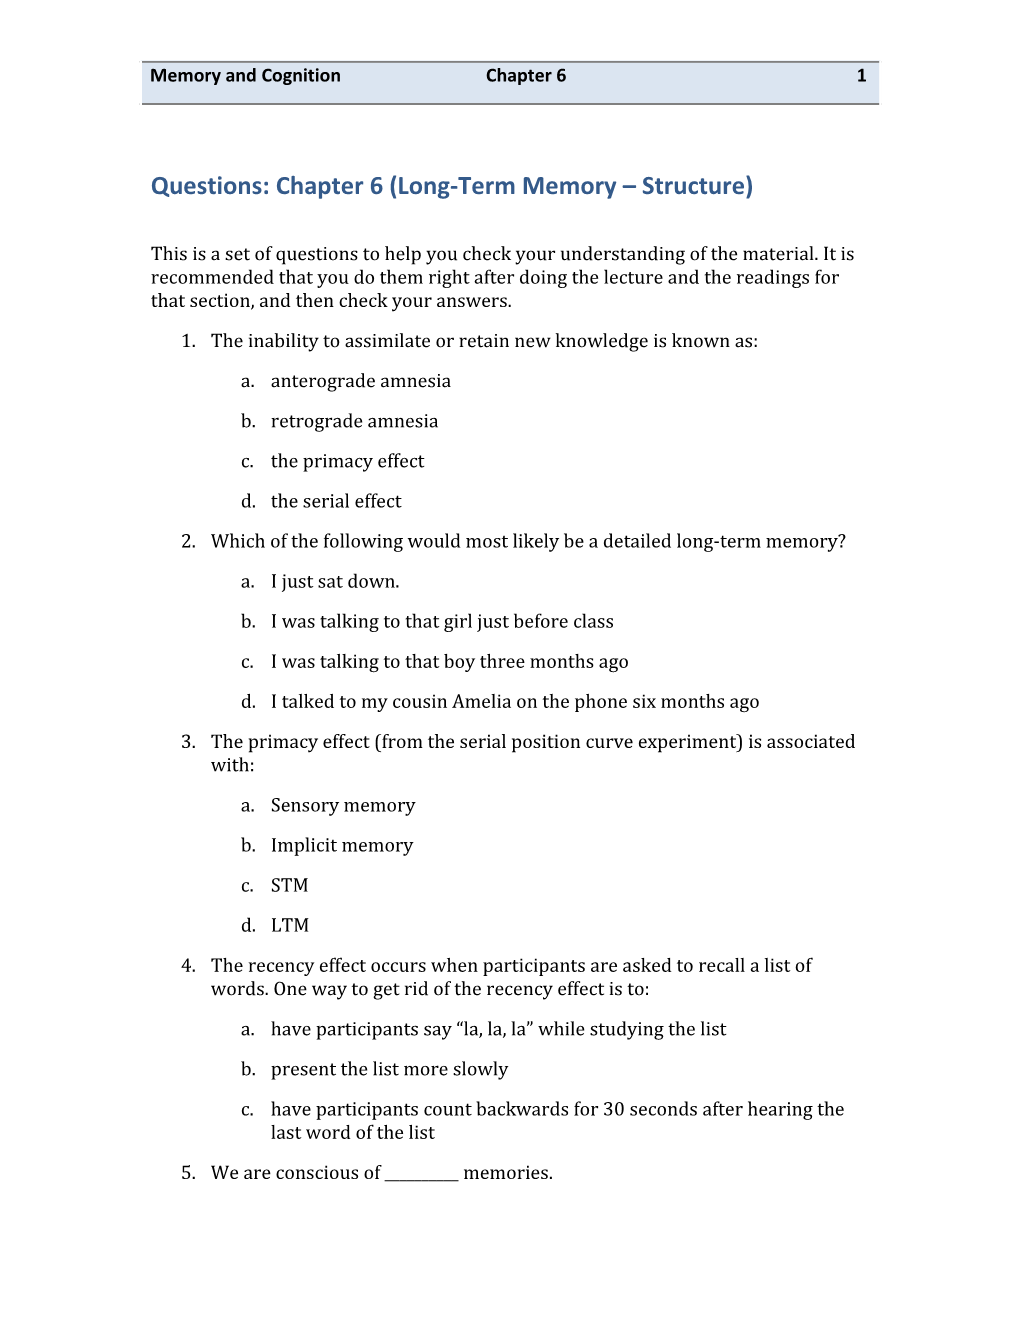 Questions: Chapter 6 (Long-Term Memory Structure)